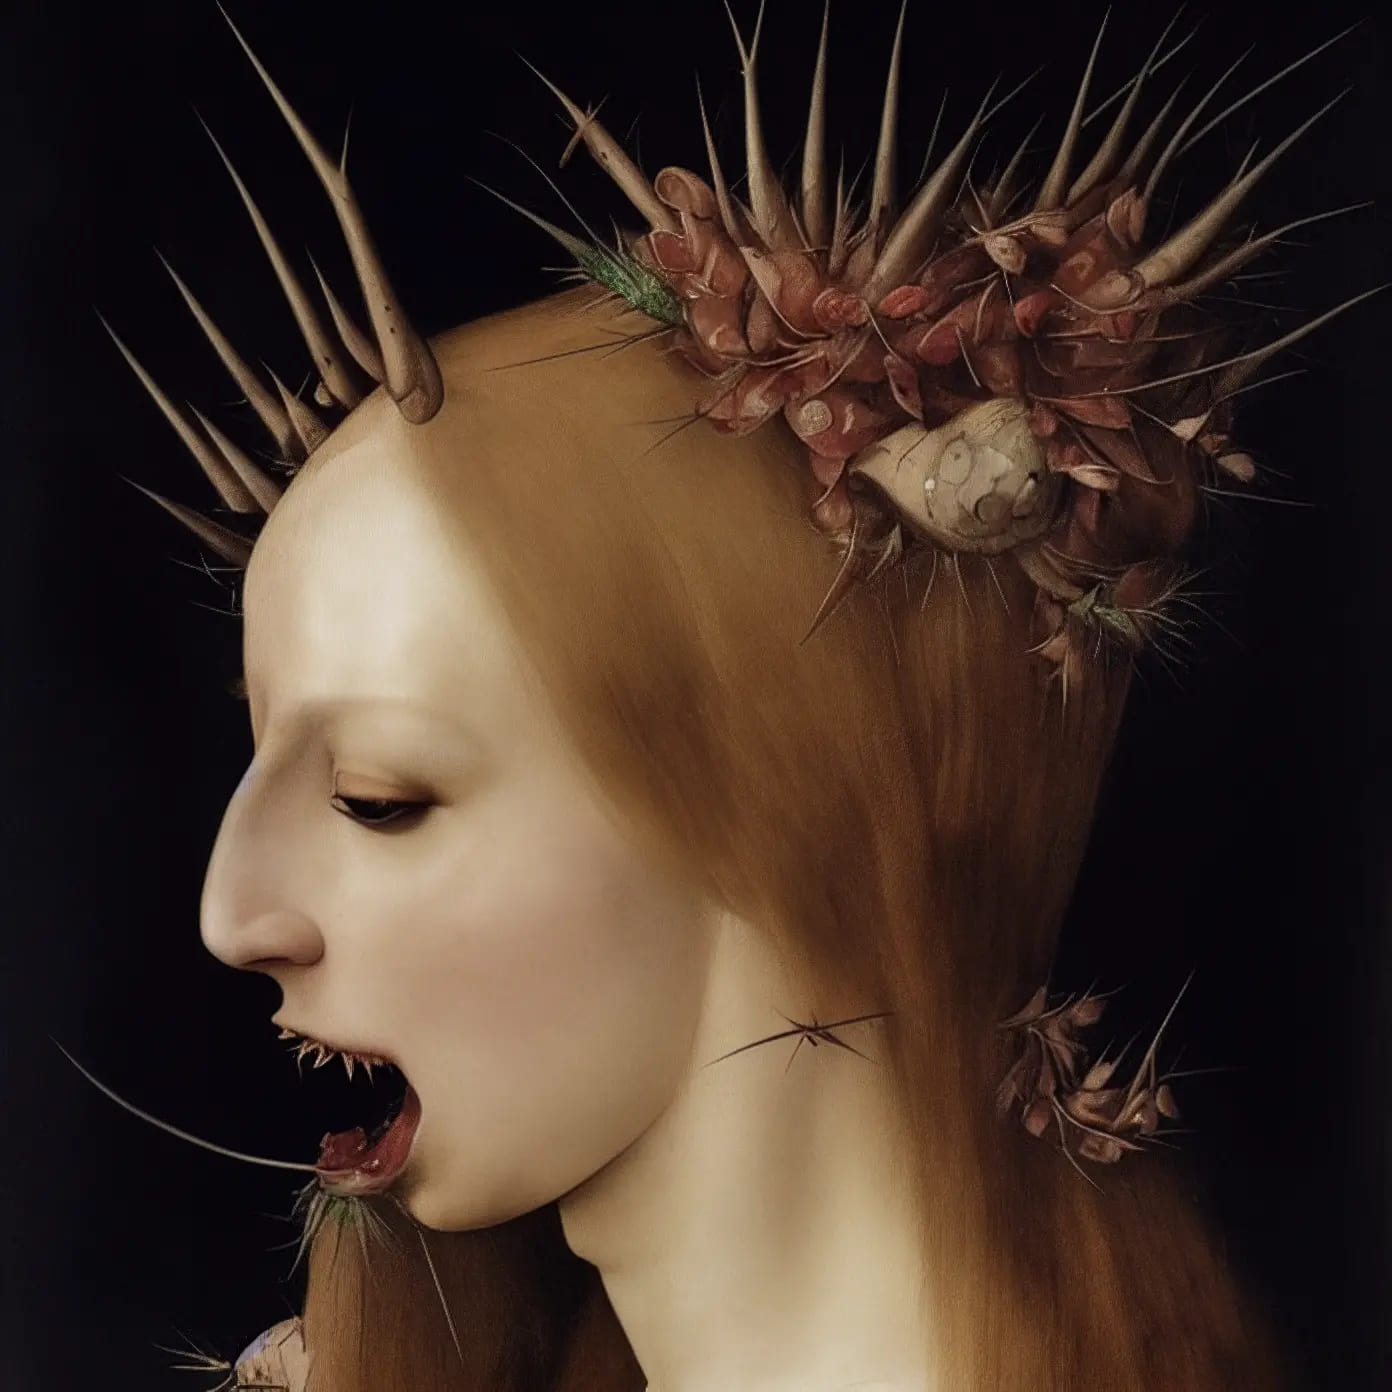 A disturbing image of an auburn-haired woman with spikes sprouting from her head and thorn-shaped teeth, her mouth gaping wide